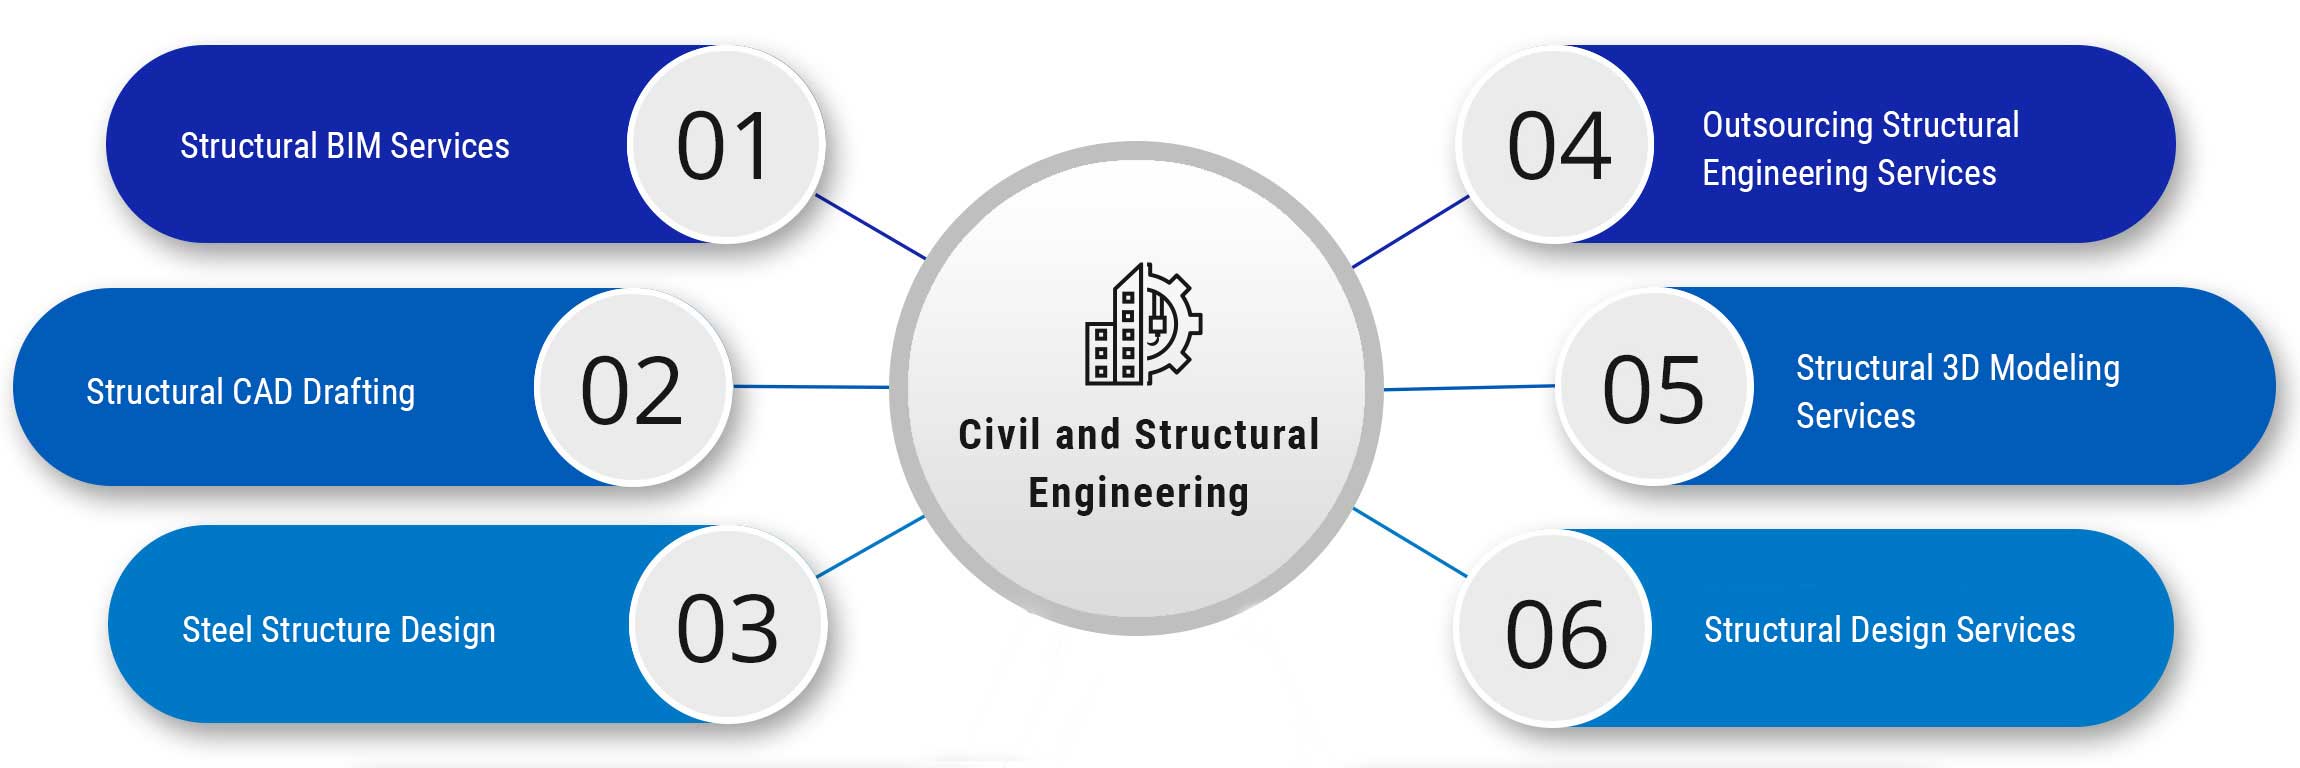 Services for Civil and Structural Engineering